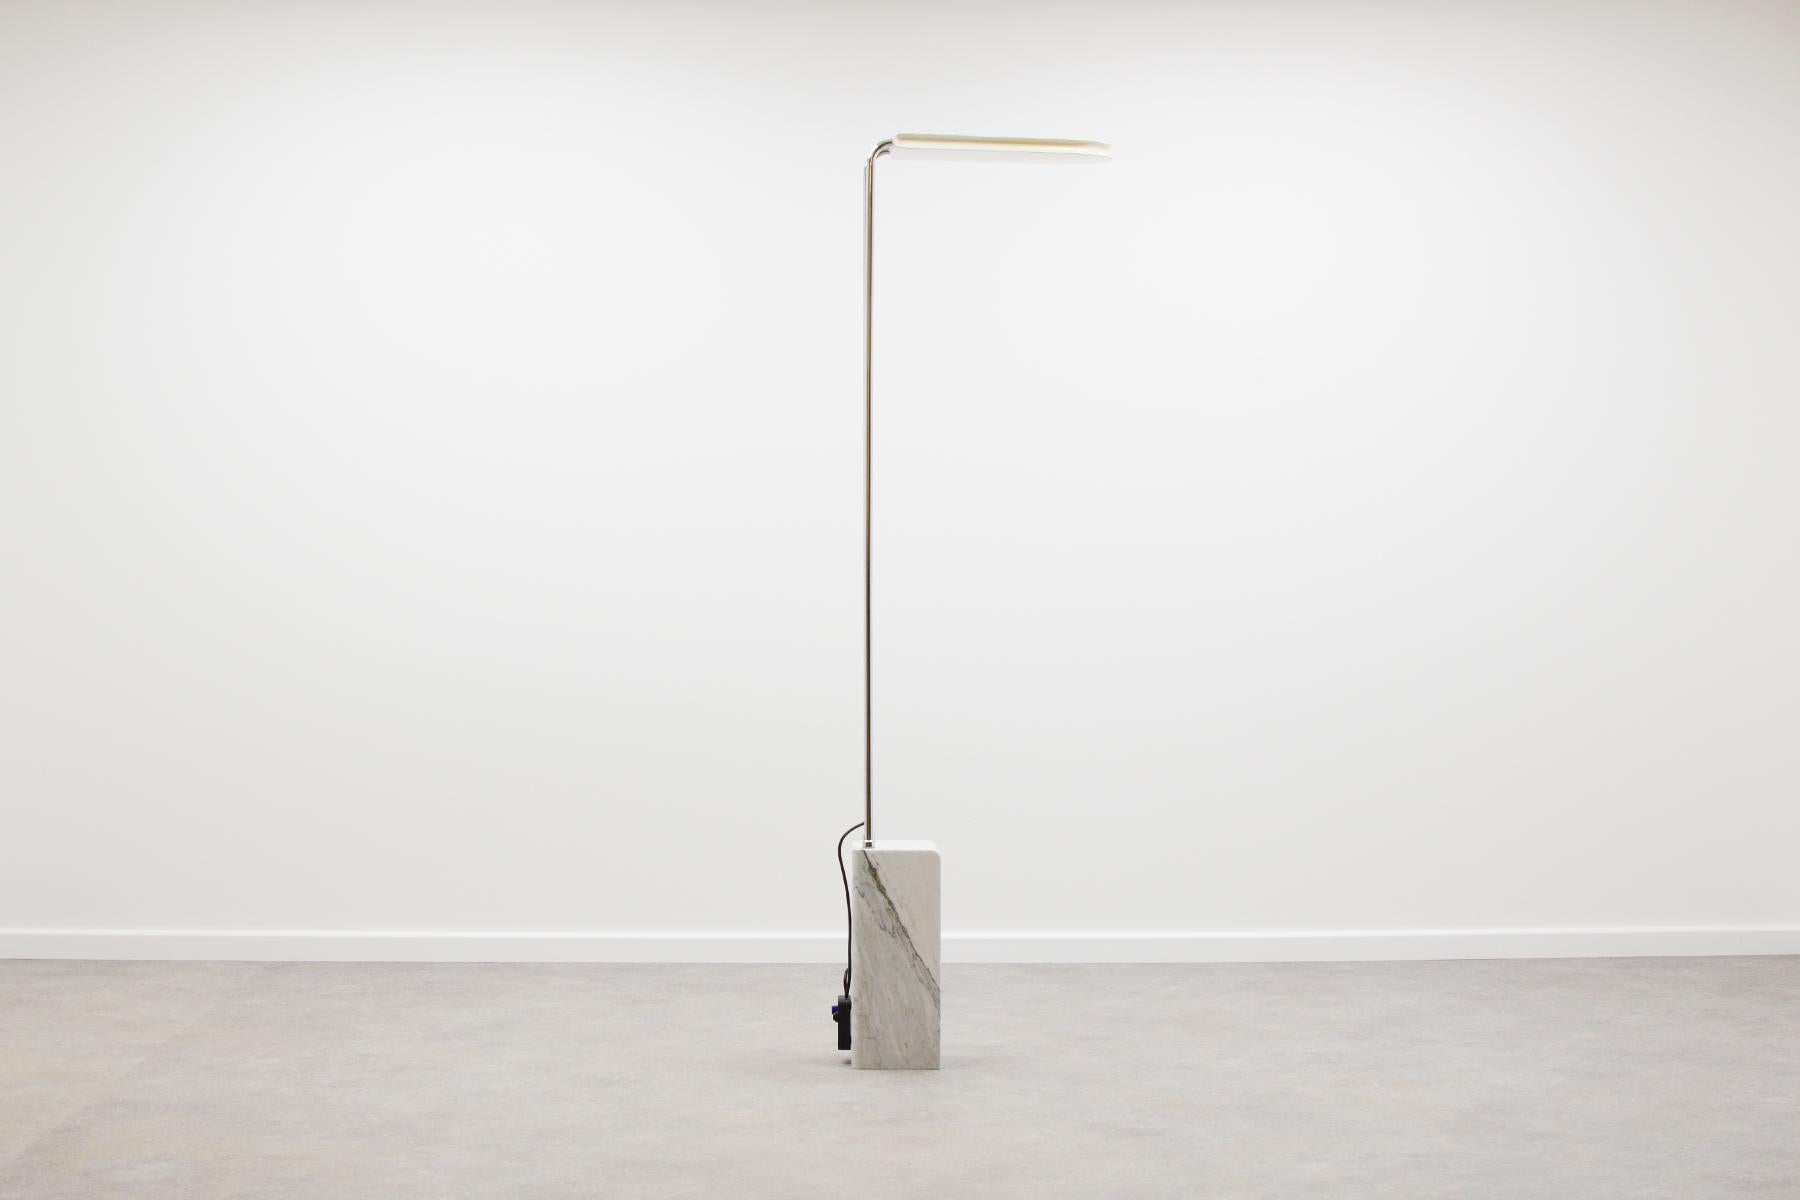 Large ‘Gesto’ floor lamp in very good condition.

Two available.

Designed by Bruno Gecchelin.

Manufactured by Skipper, Italy, 1970s

The base is made of white Carrara marble with beautiful grey veins. 

A chromed frame holds a white lacquered